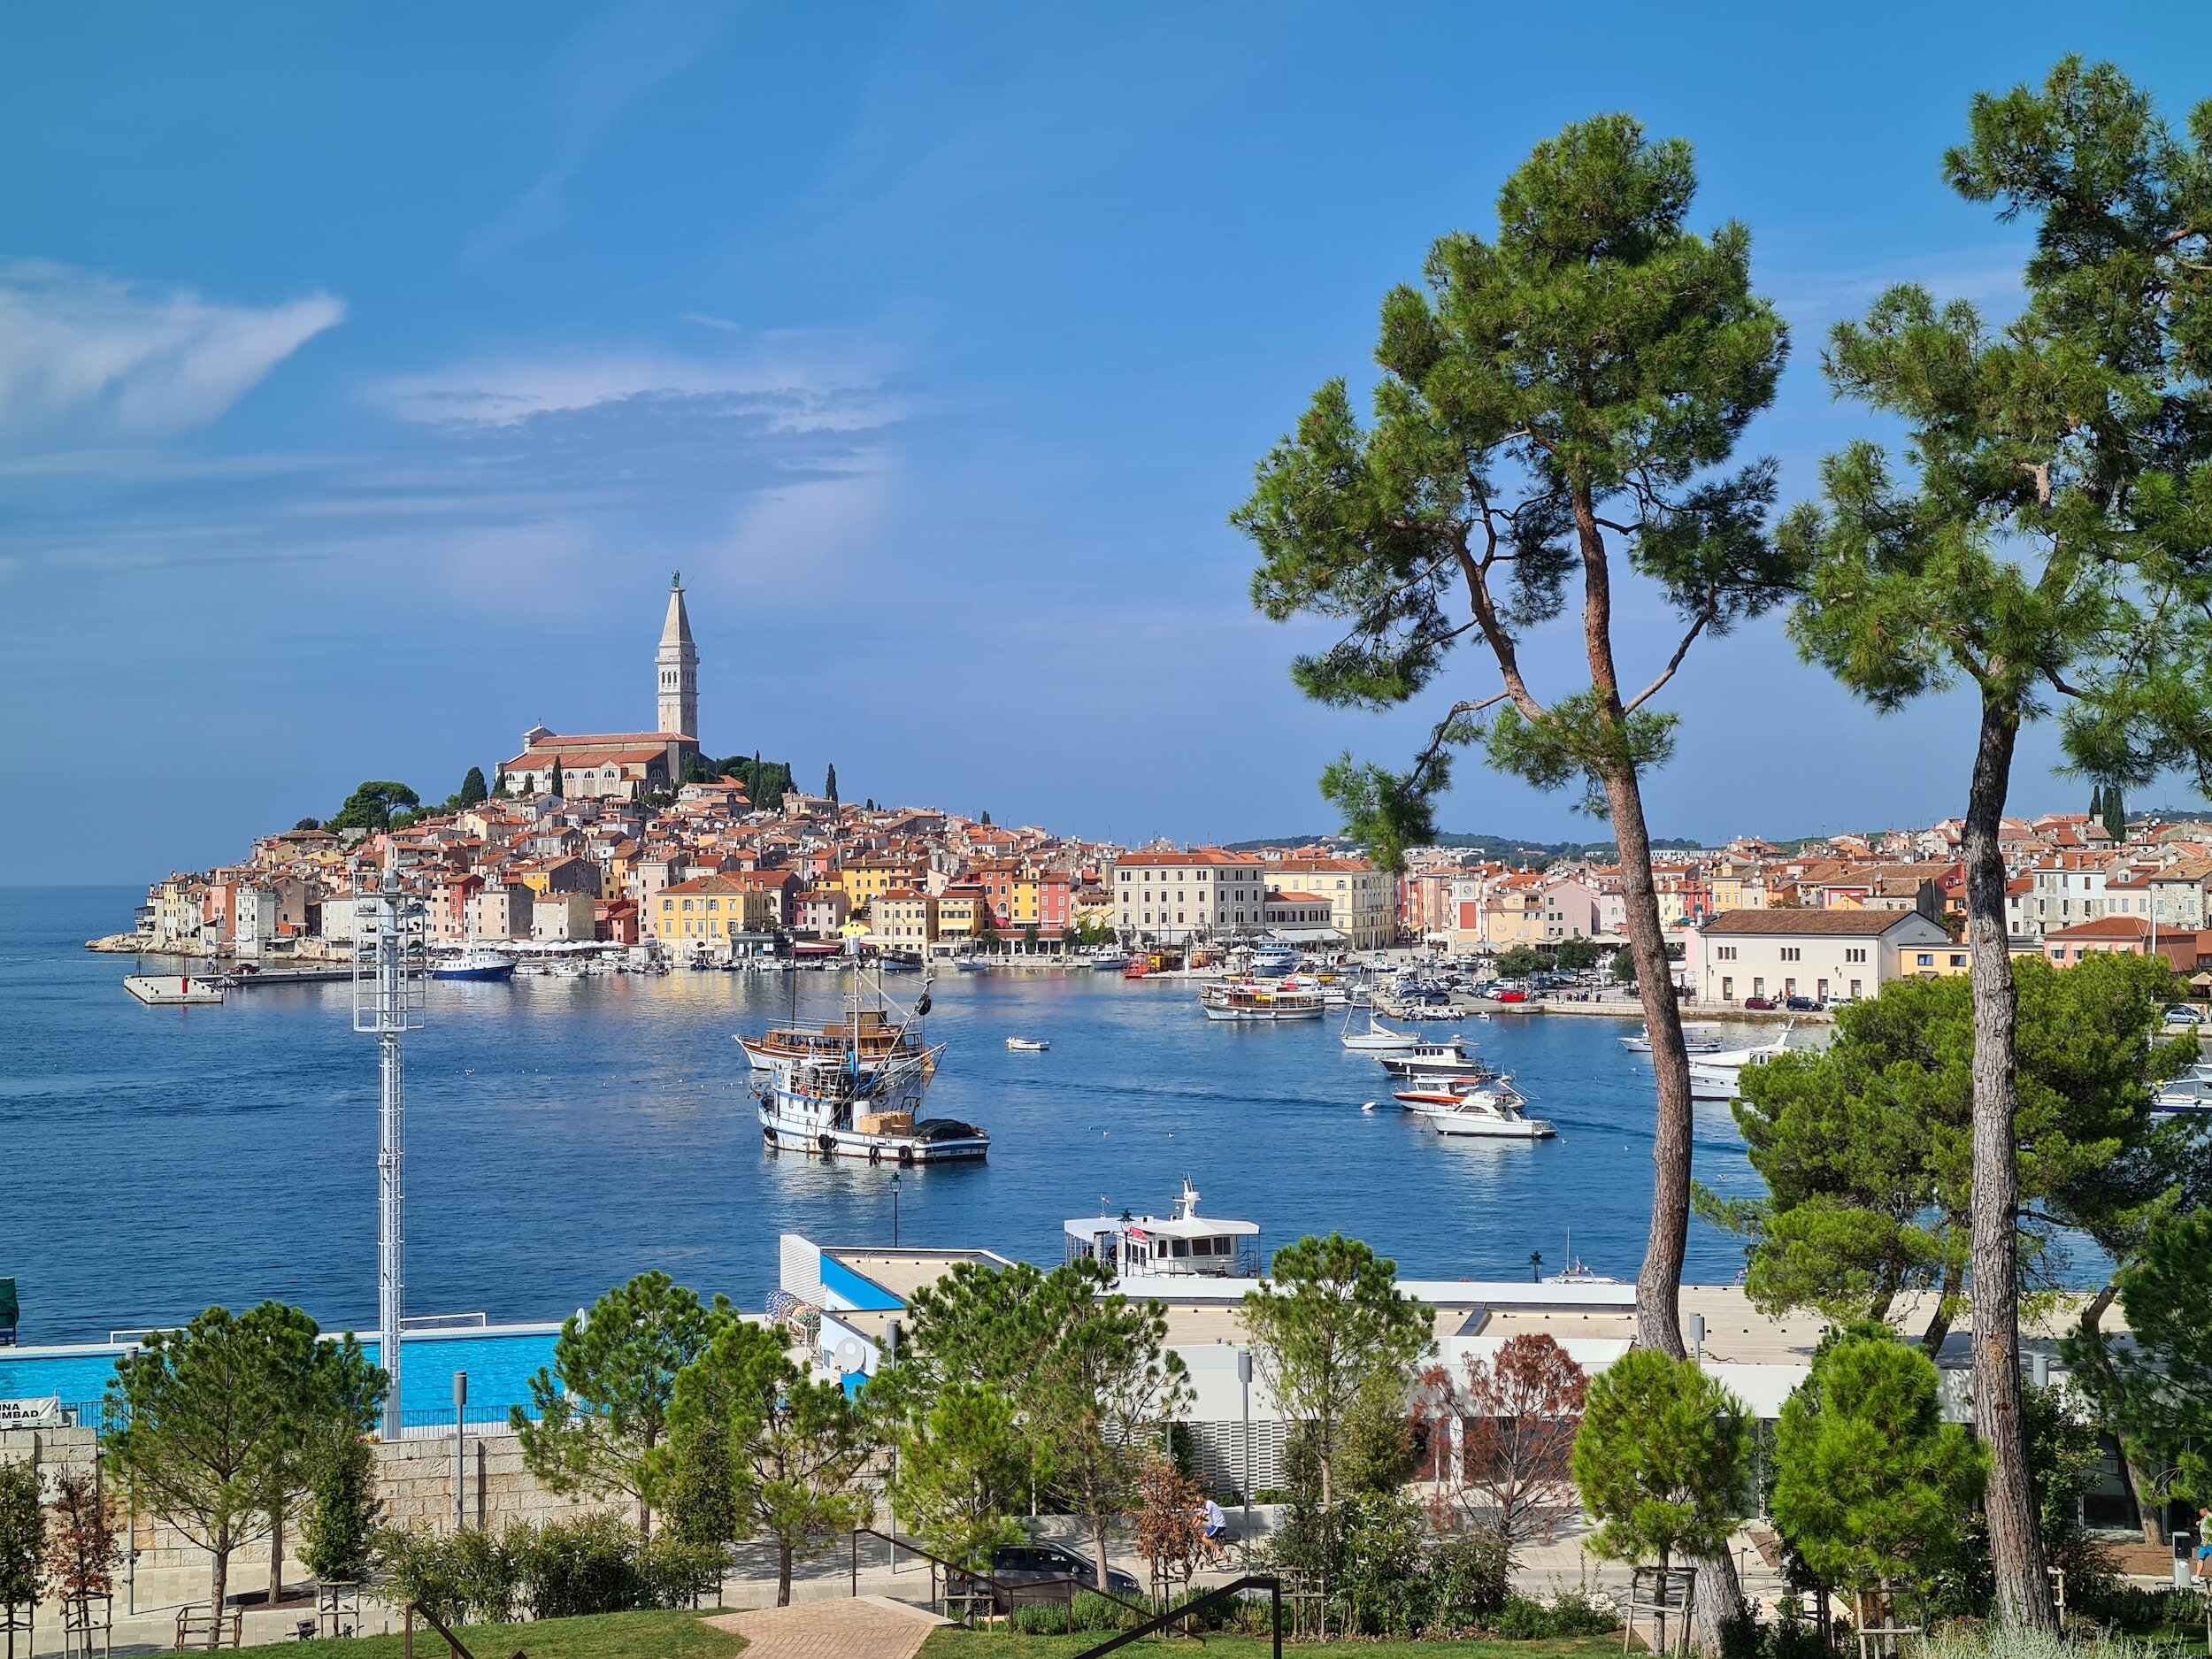 The beautiful Istrian town of Rovinj on a promontory in the water with its church steeple rising high above the town as seen from across the water